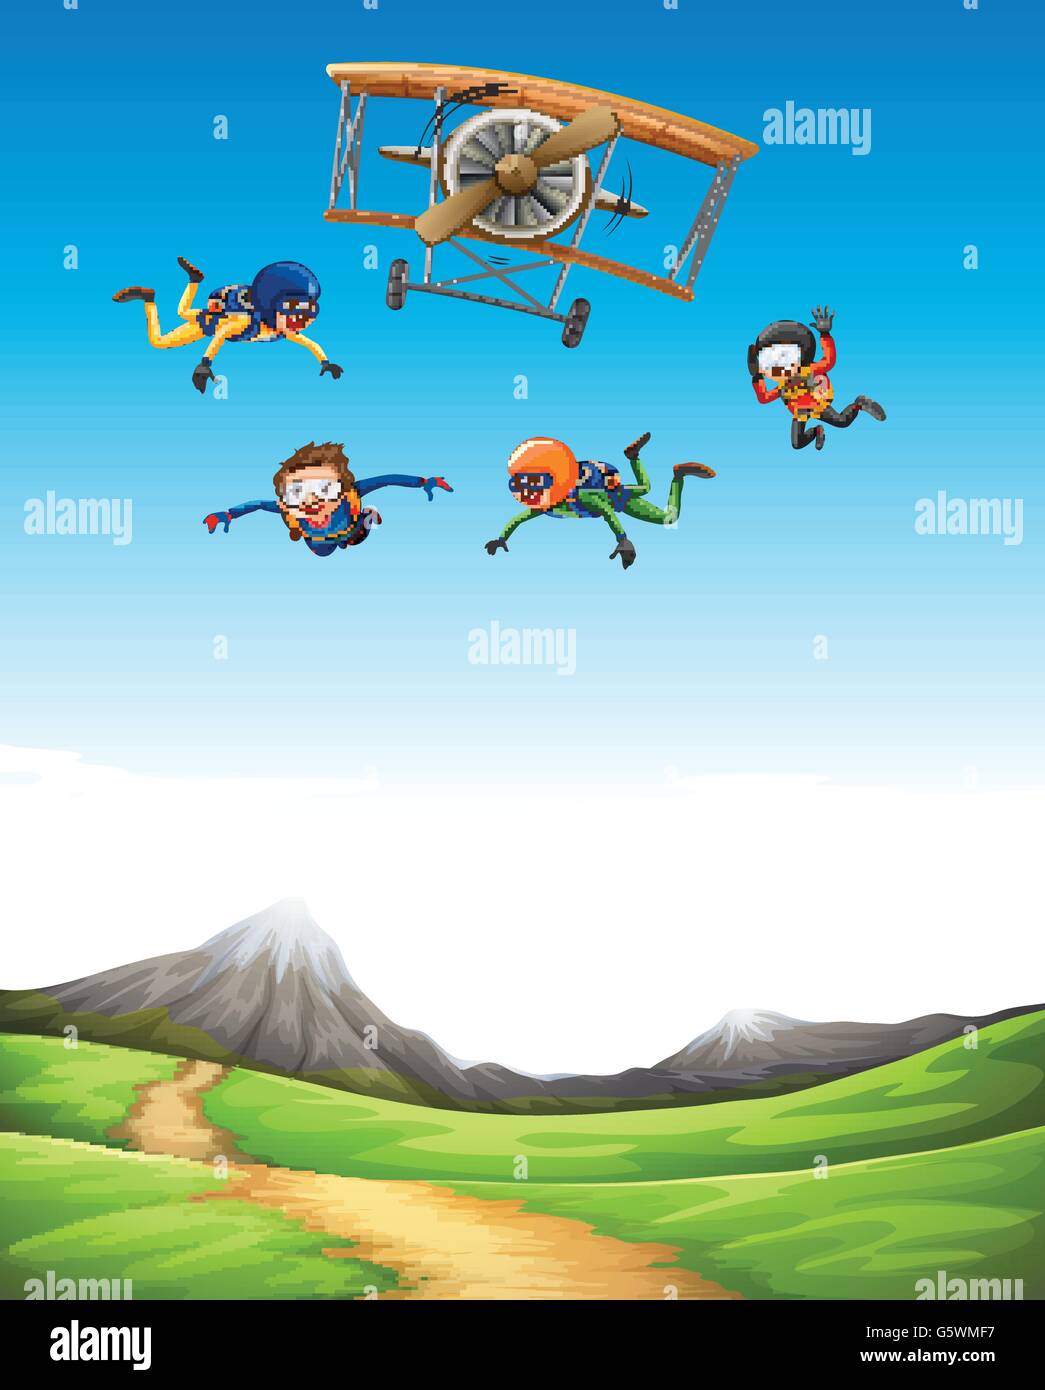 Four people doing sky diving illustration Stock Vector